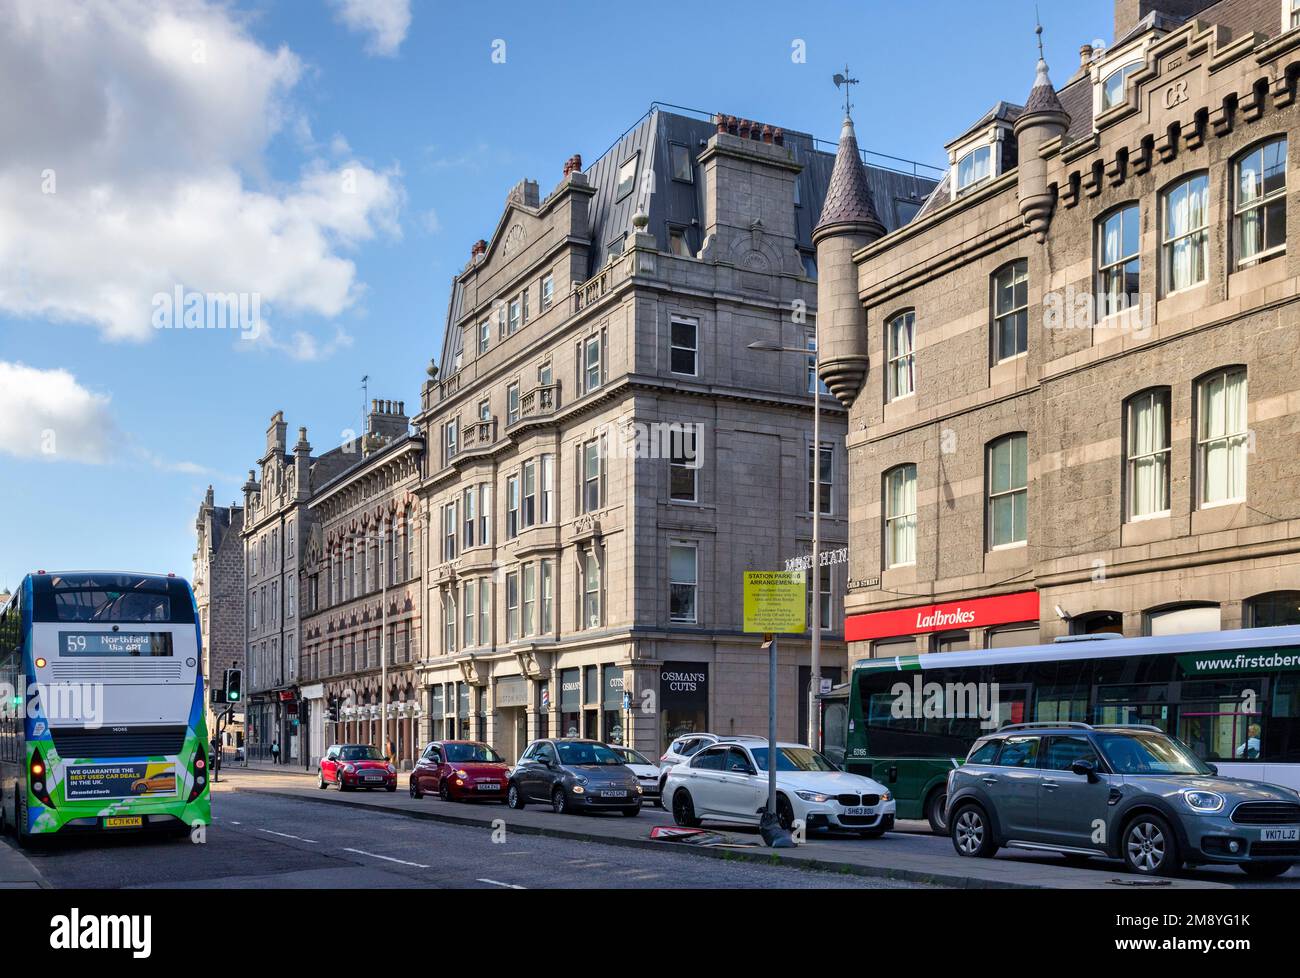 13 September 2022: Aberdeen, Scotland - Guild Street in the CBD, showing the famous Victorian granite architecture which has led to it being called... Stock Photo